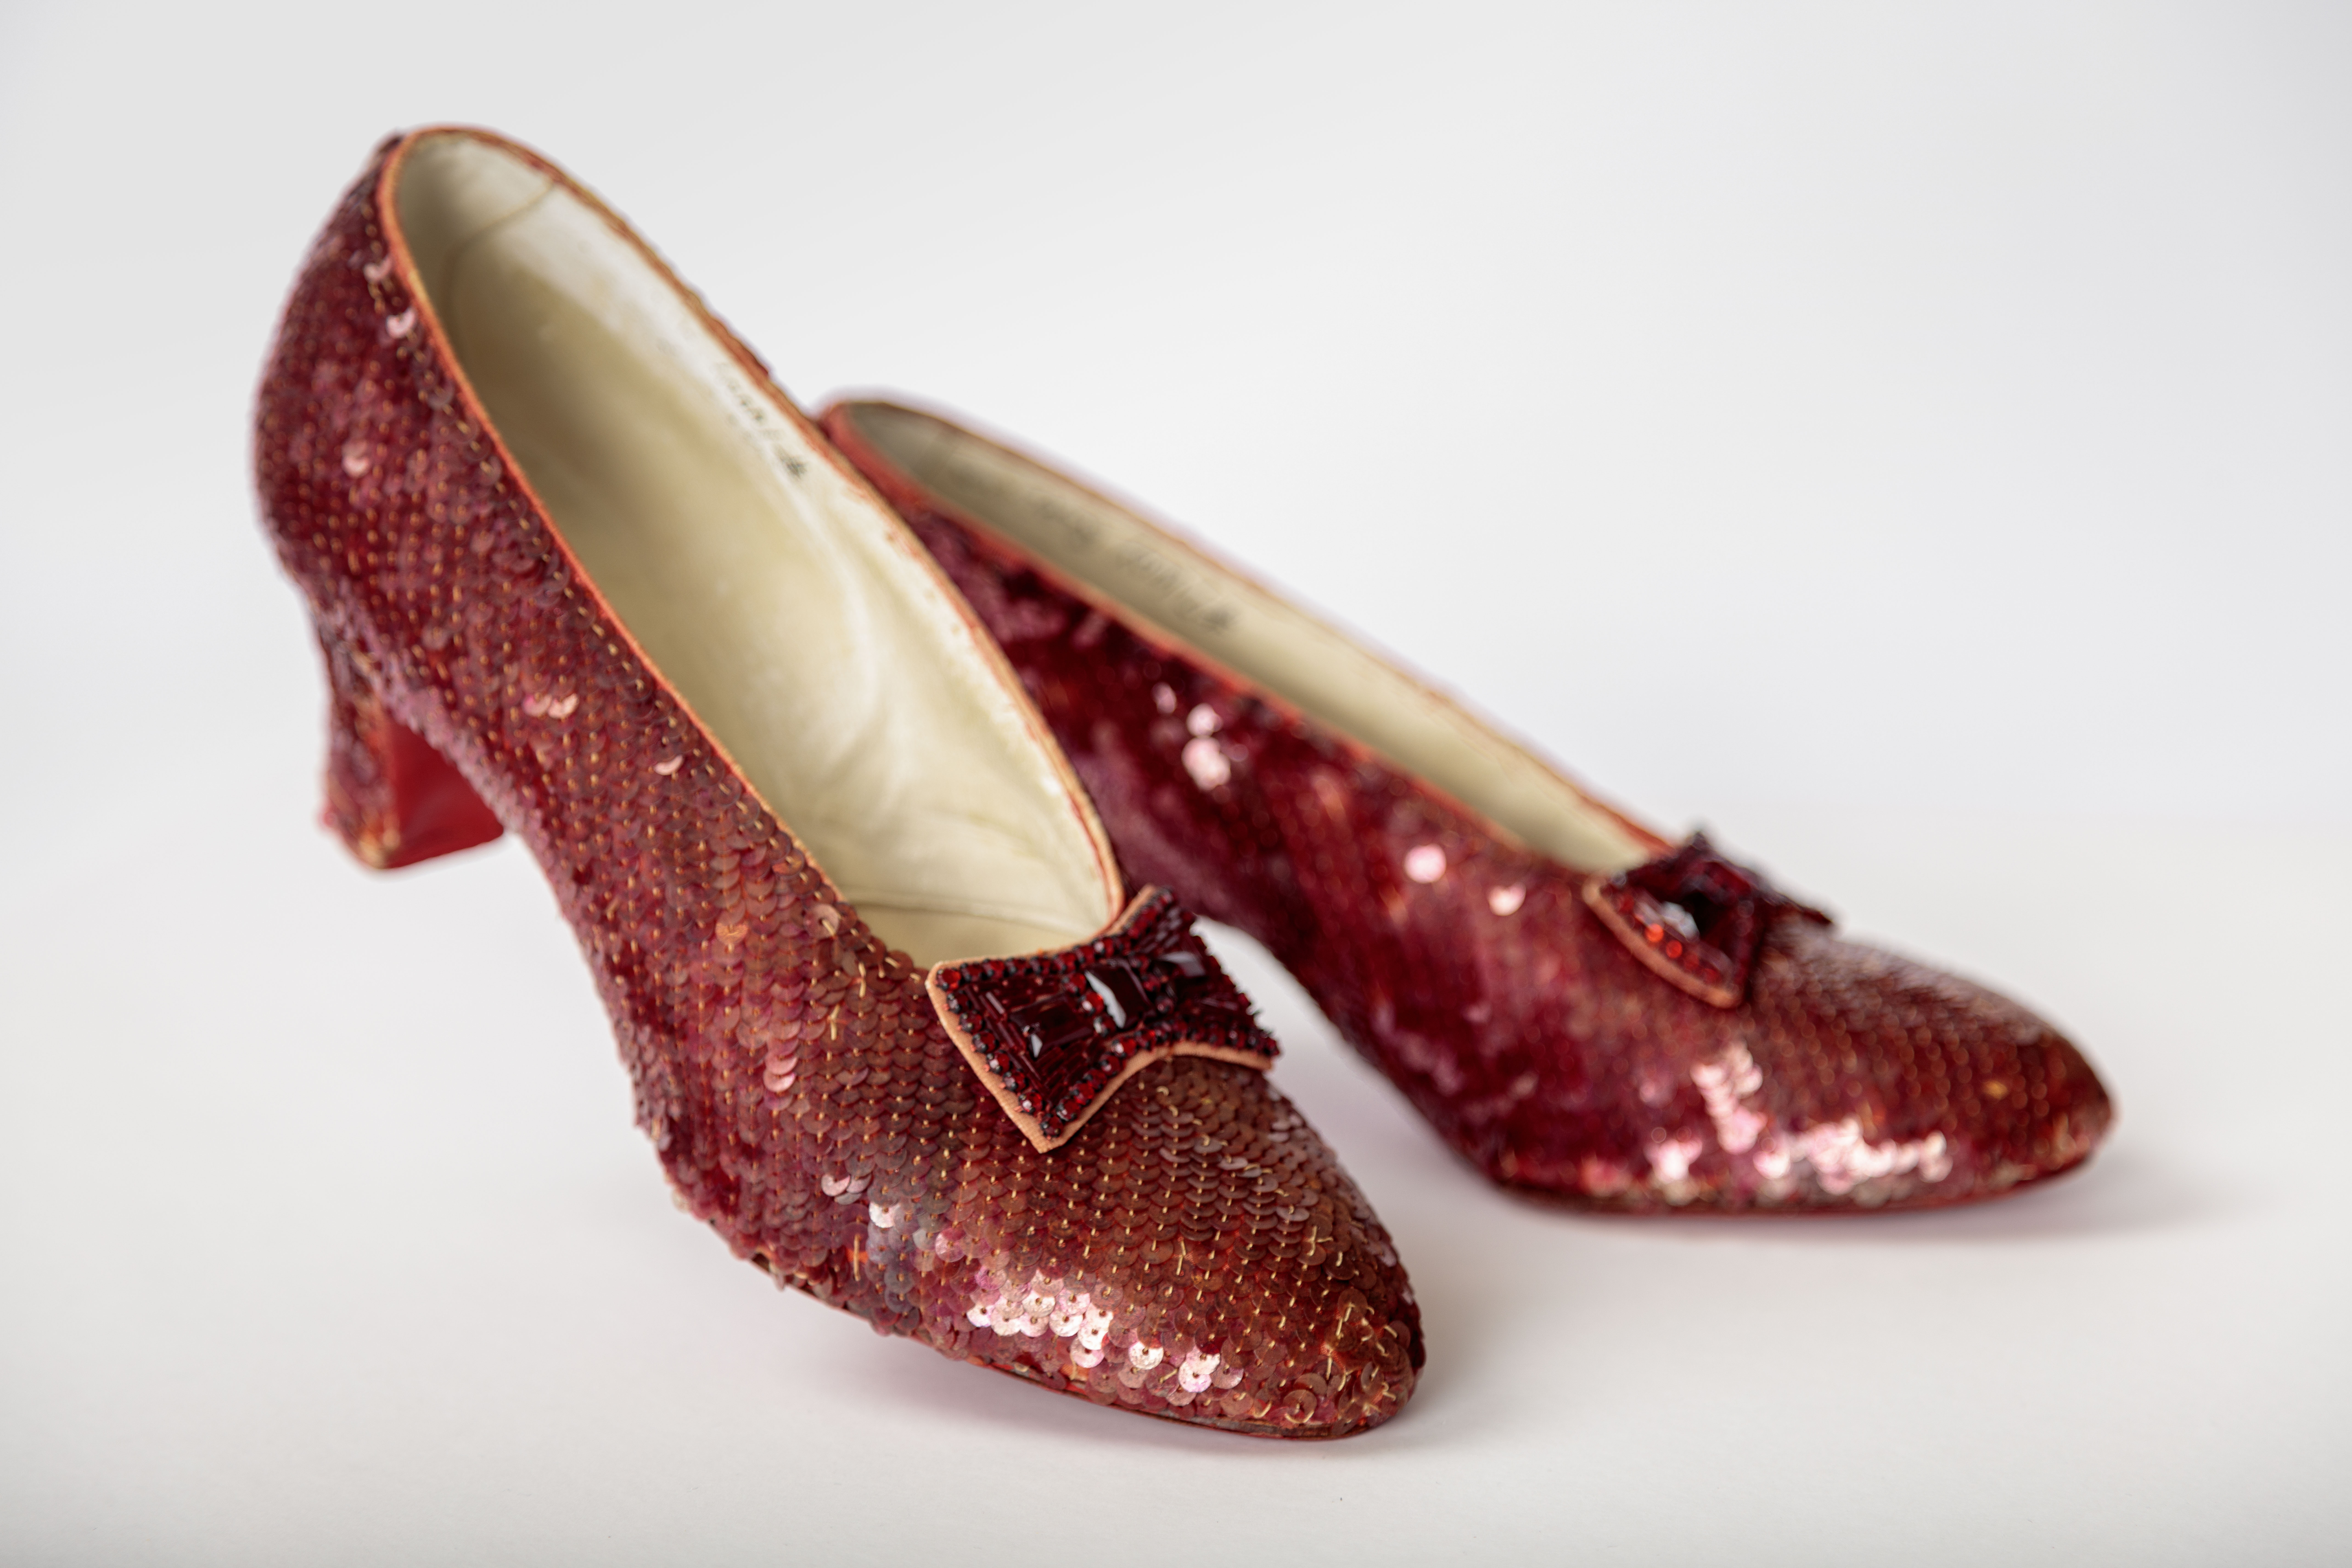 Ruby Slippers used in the filming of &quot;The Wizard of Oz&quot;